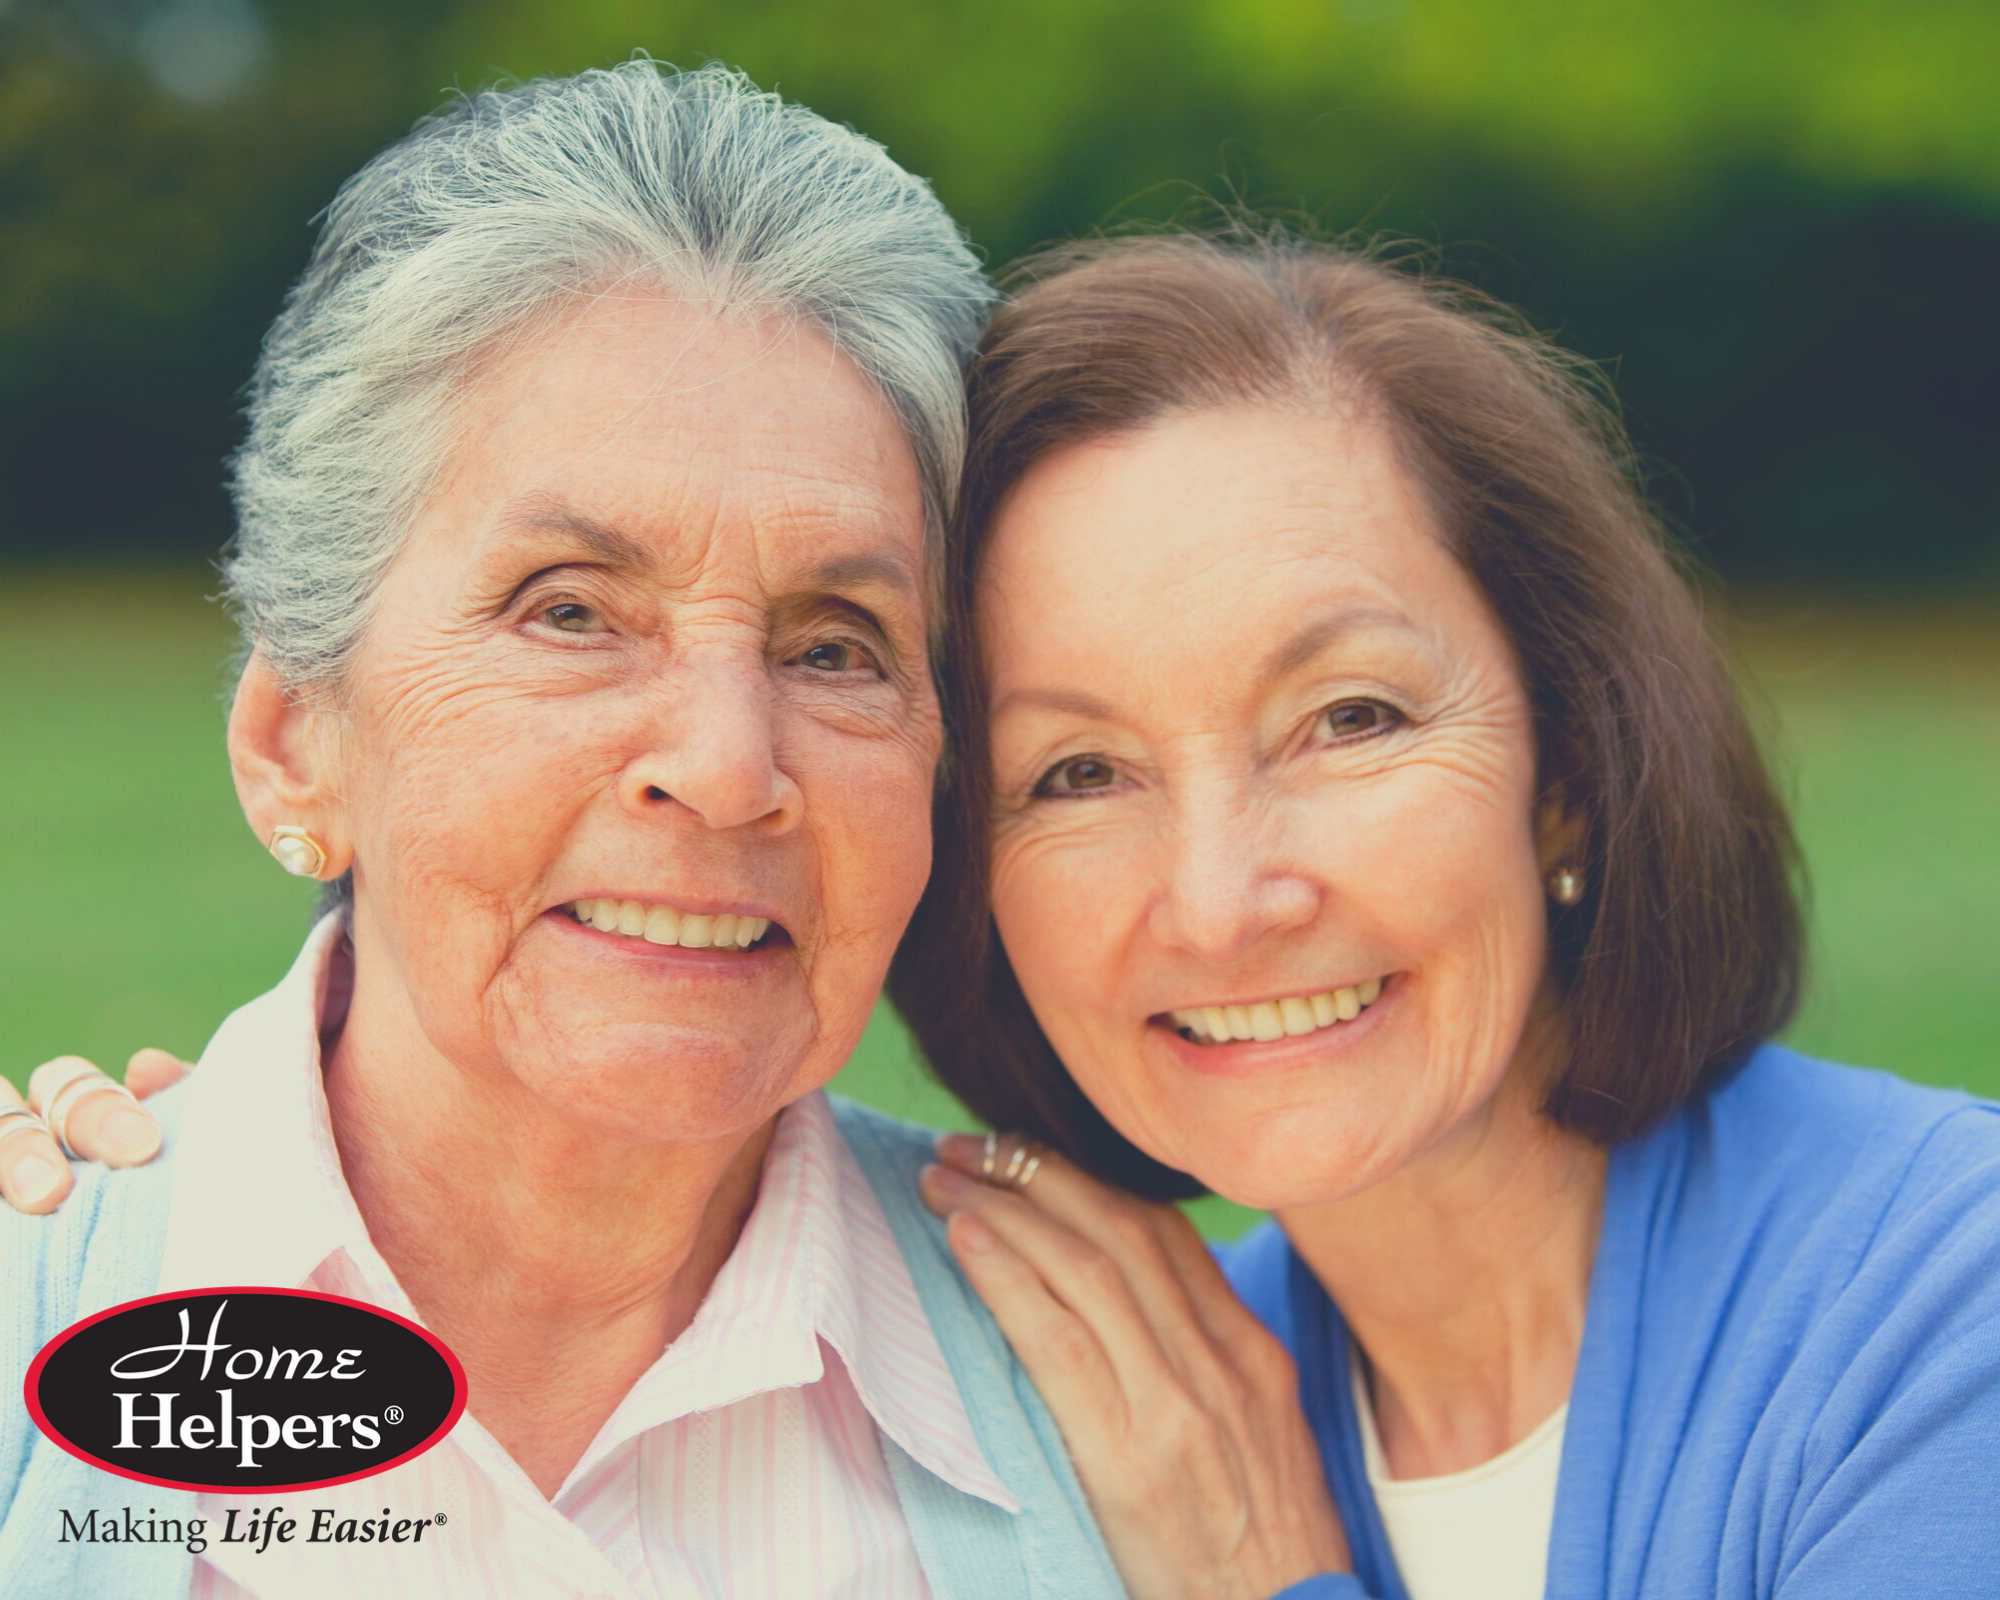 Home Helpers Home Care of Springdale